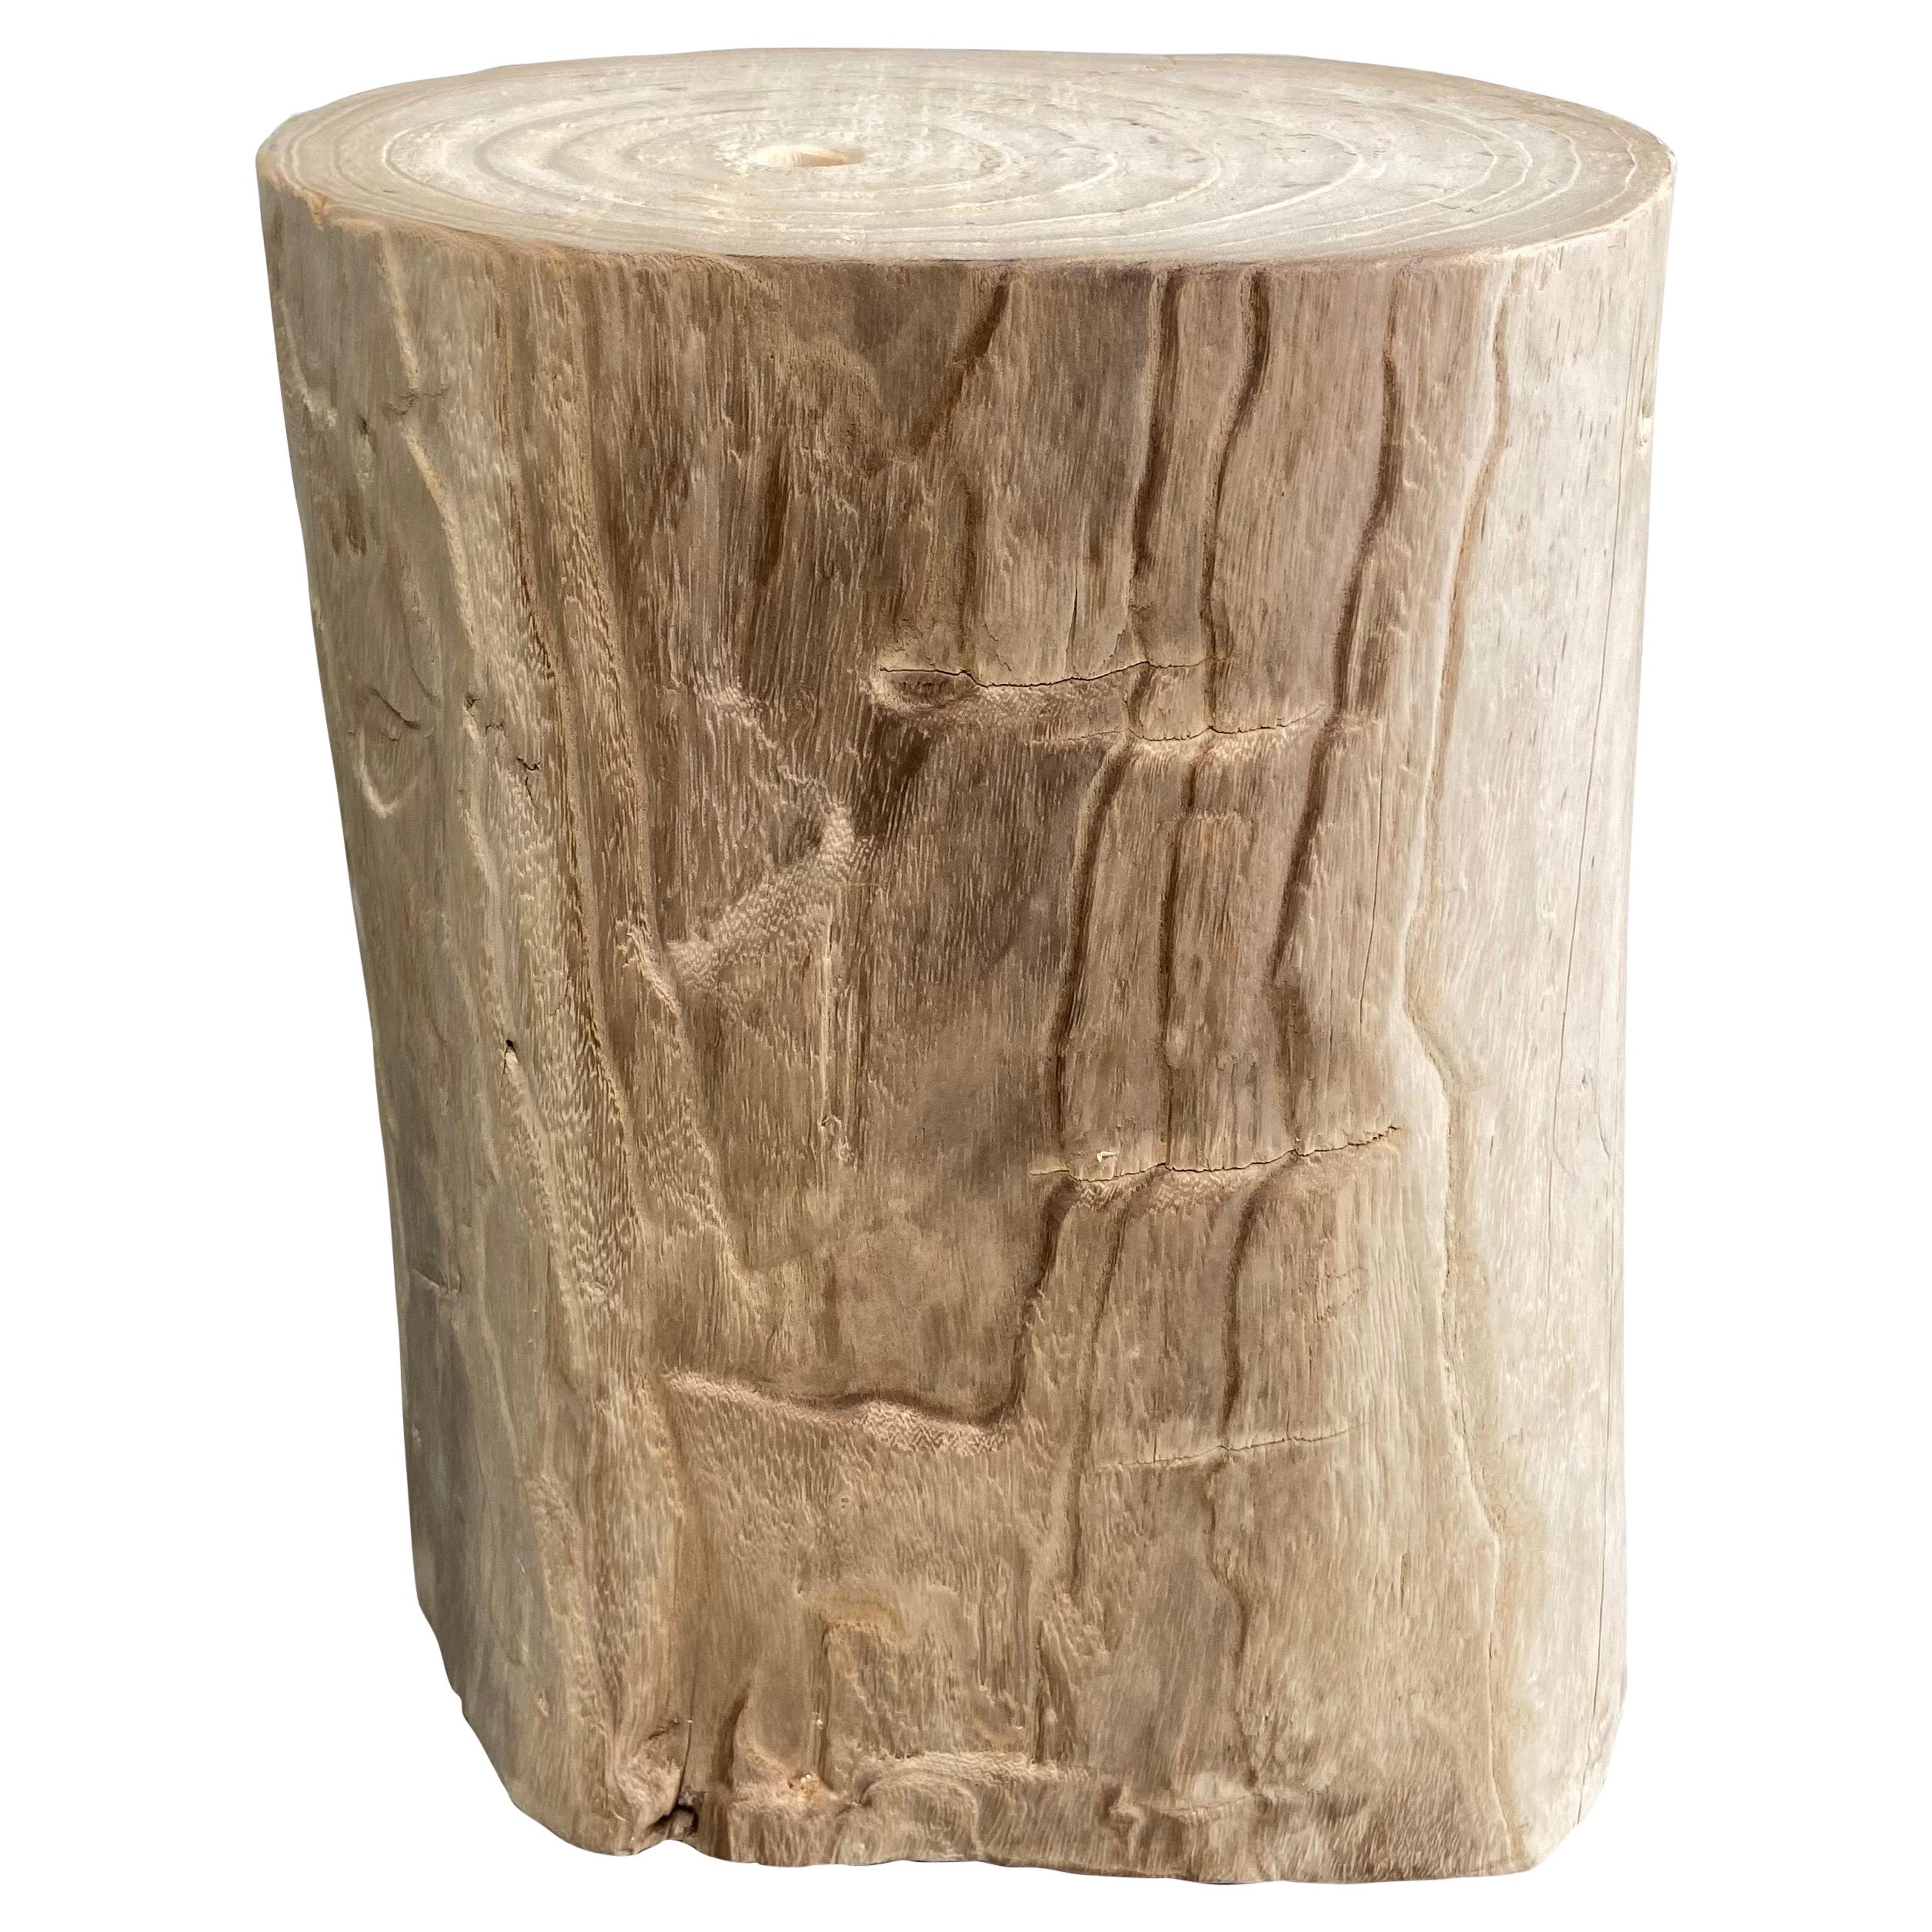 Natural Wood Stump Stool or Side Table